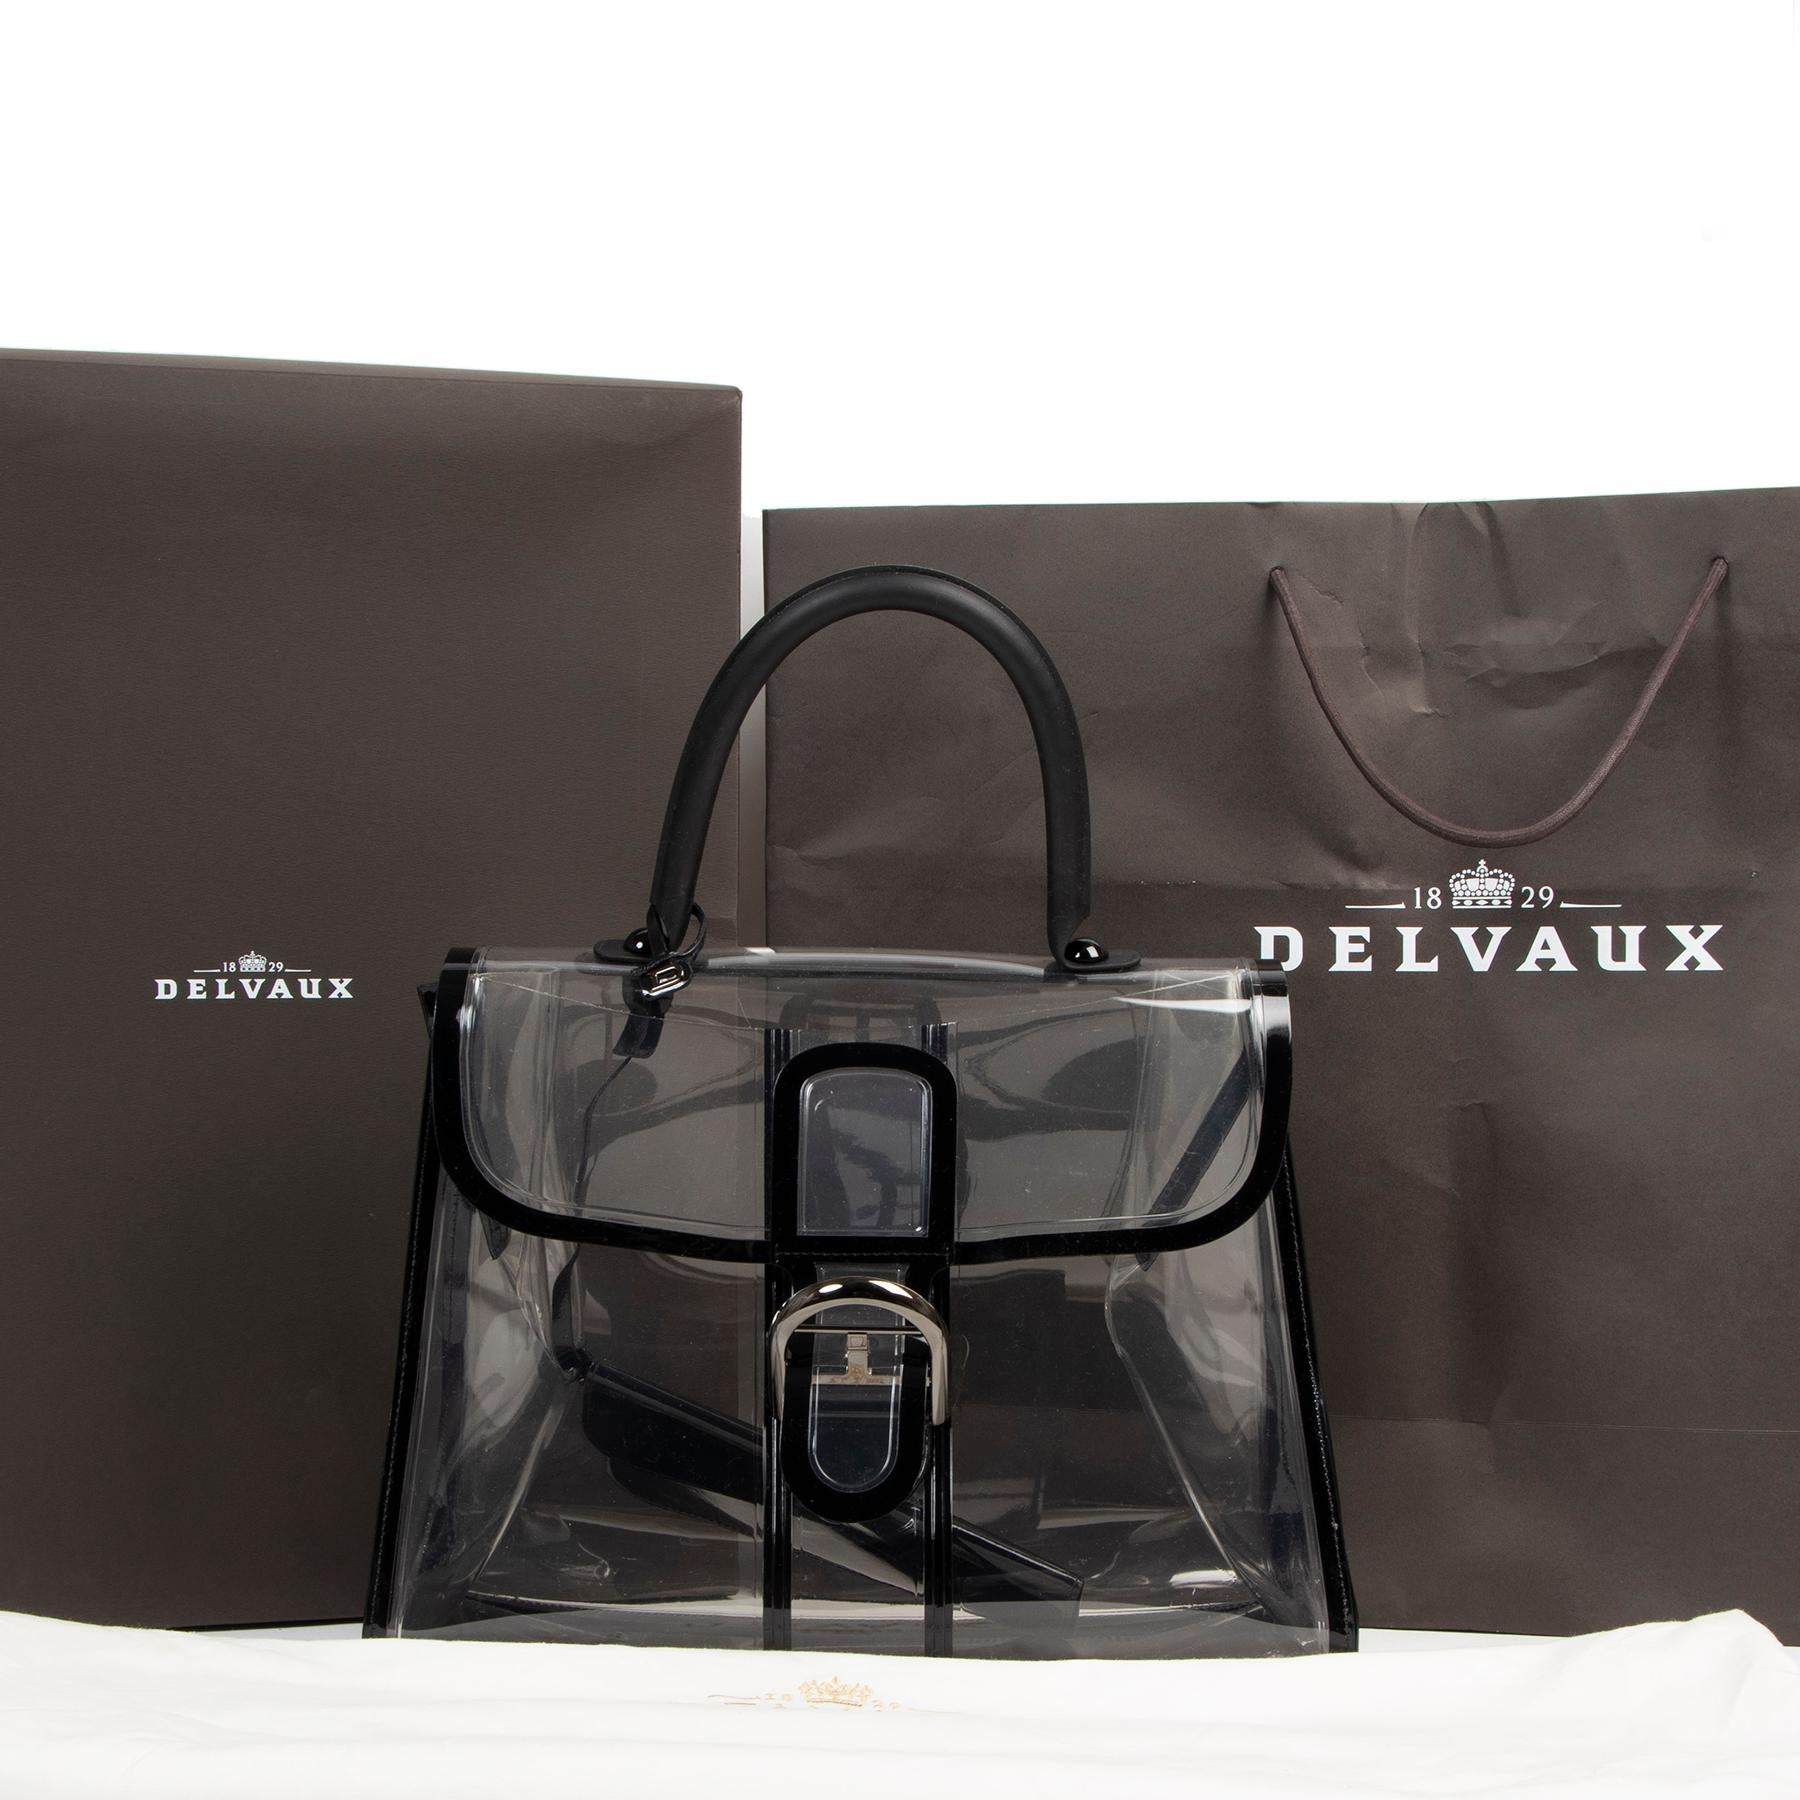 Very good preloved condition

Delvaux Brillant X-Ray Limited Edition

This limited edition Delvaux X-Ray is a true collector's item for every Delvaux lover out there. Crafted entirely in smooth transparant PVC material and finished off with